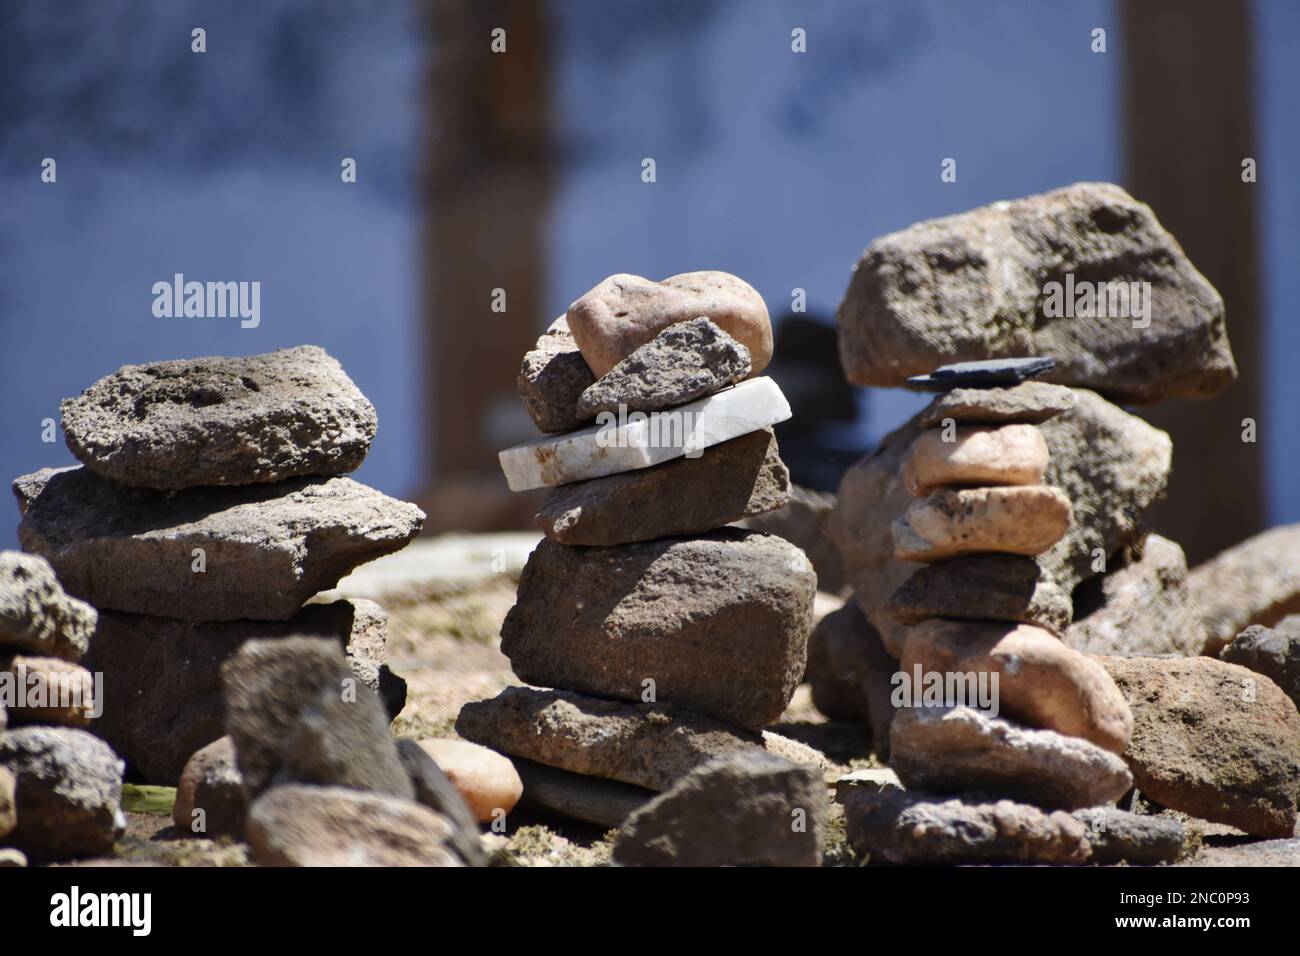 Cairn the art of stone balancing on a stone Stock Photo